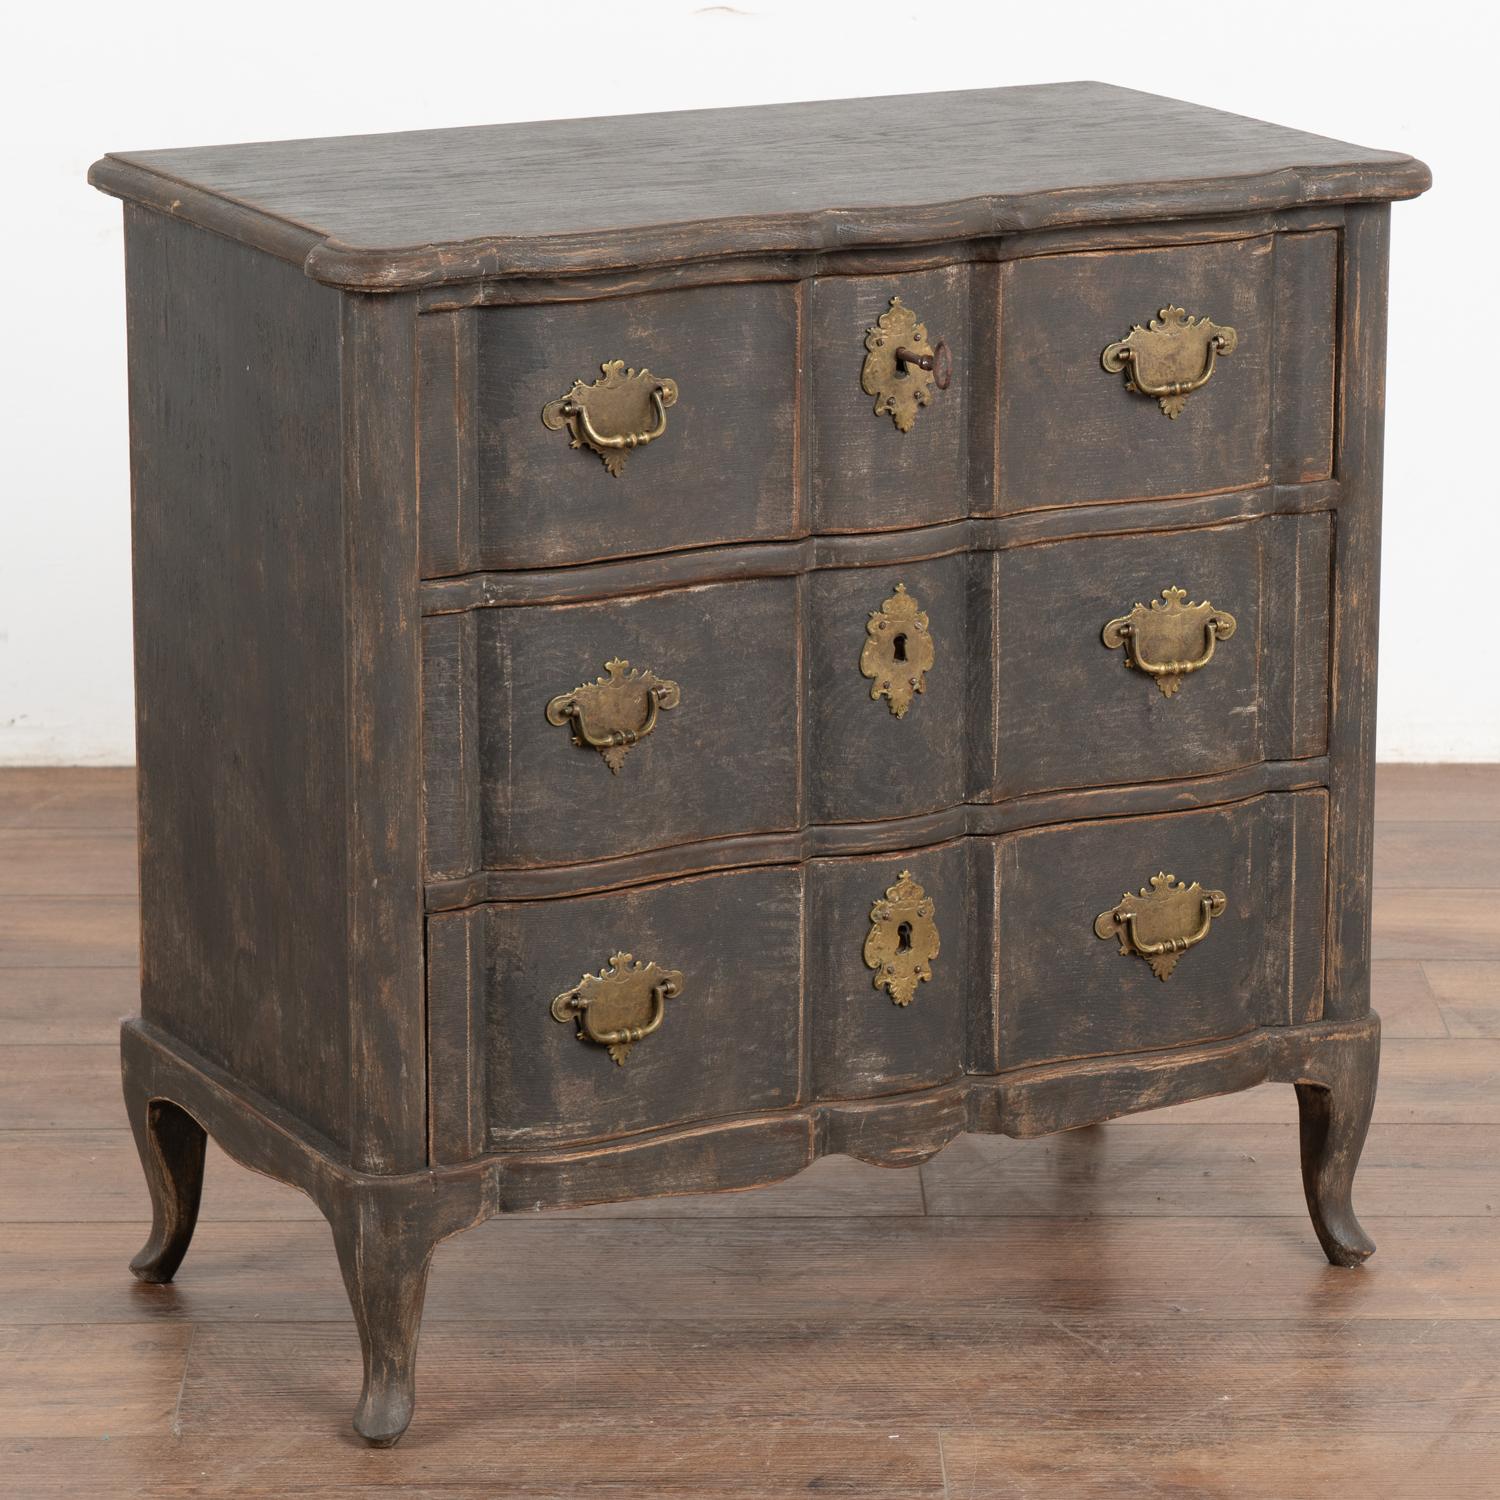 This small chest of three drawers has a touch of dramatic appeal thanks to the (newer/professional) black painted finish that is gently distressed, accenting the Rococo curves and cabriole feet.
The size makes it adaptable to use as a nightstand,